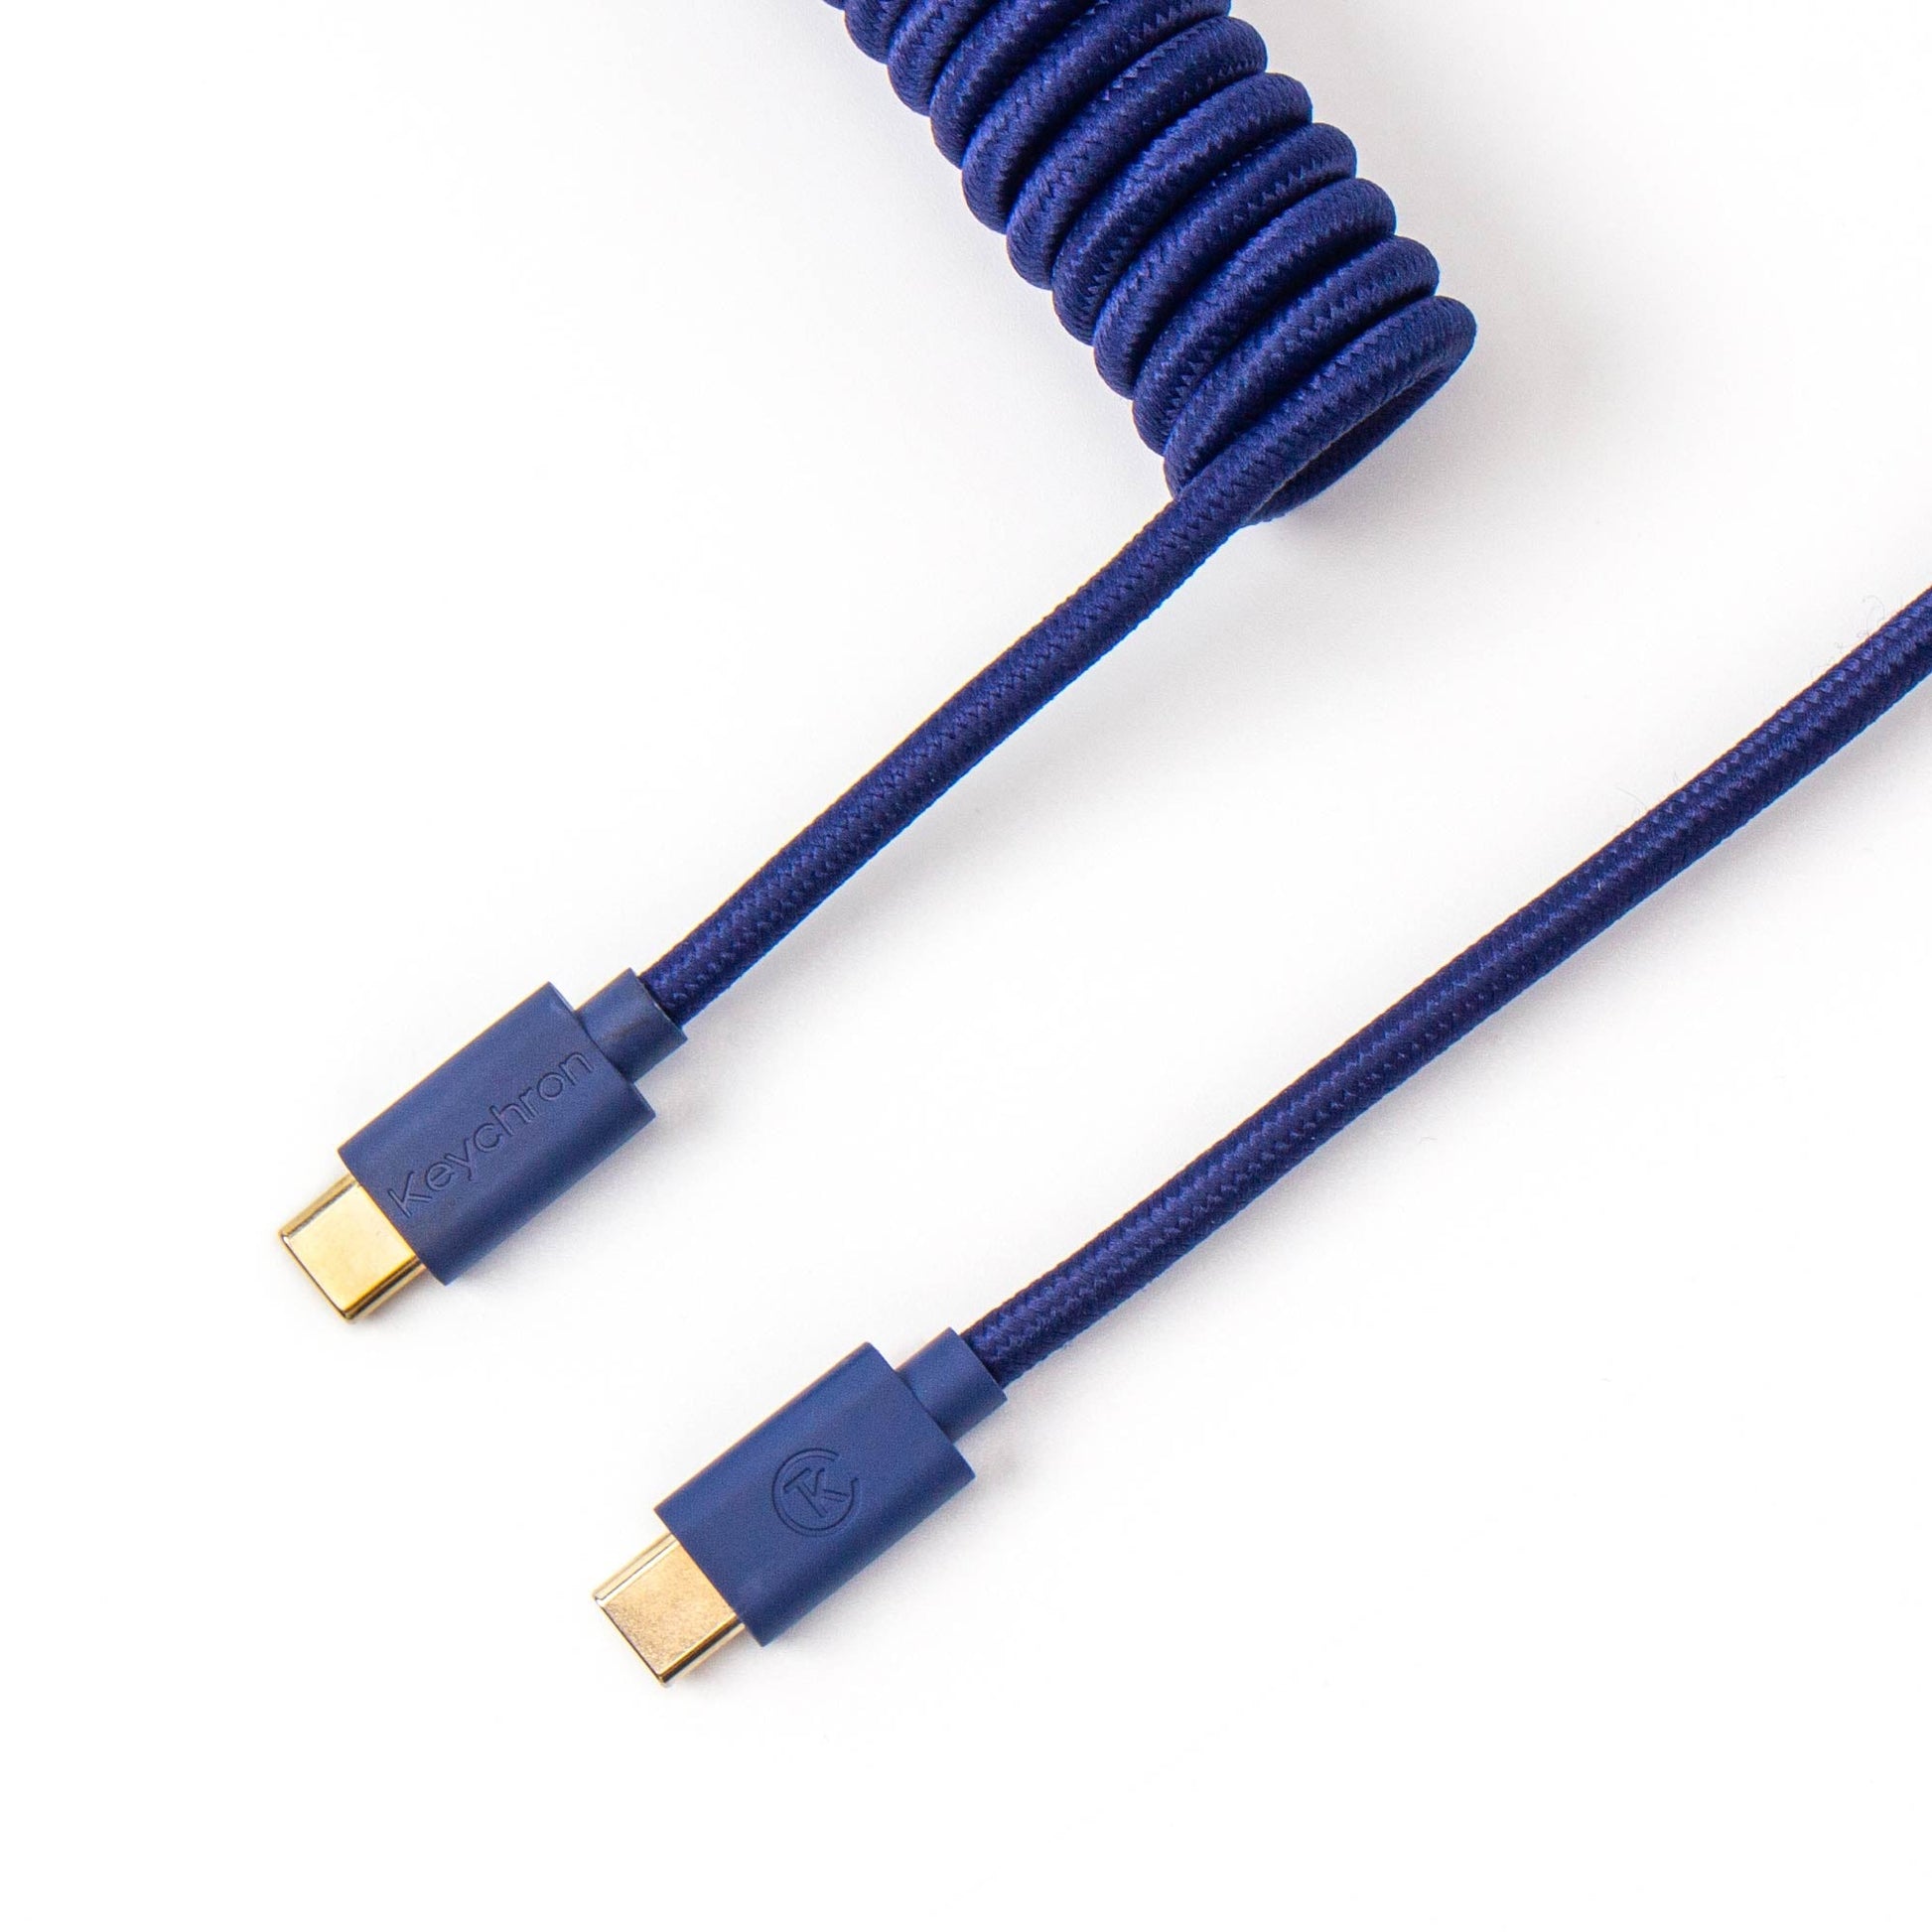 Coiled Aviator Cable for Mechanical Keyboards